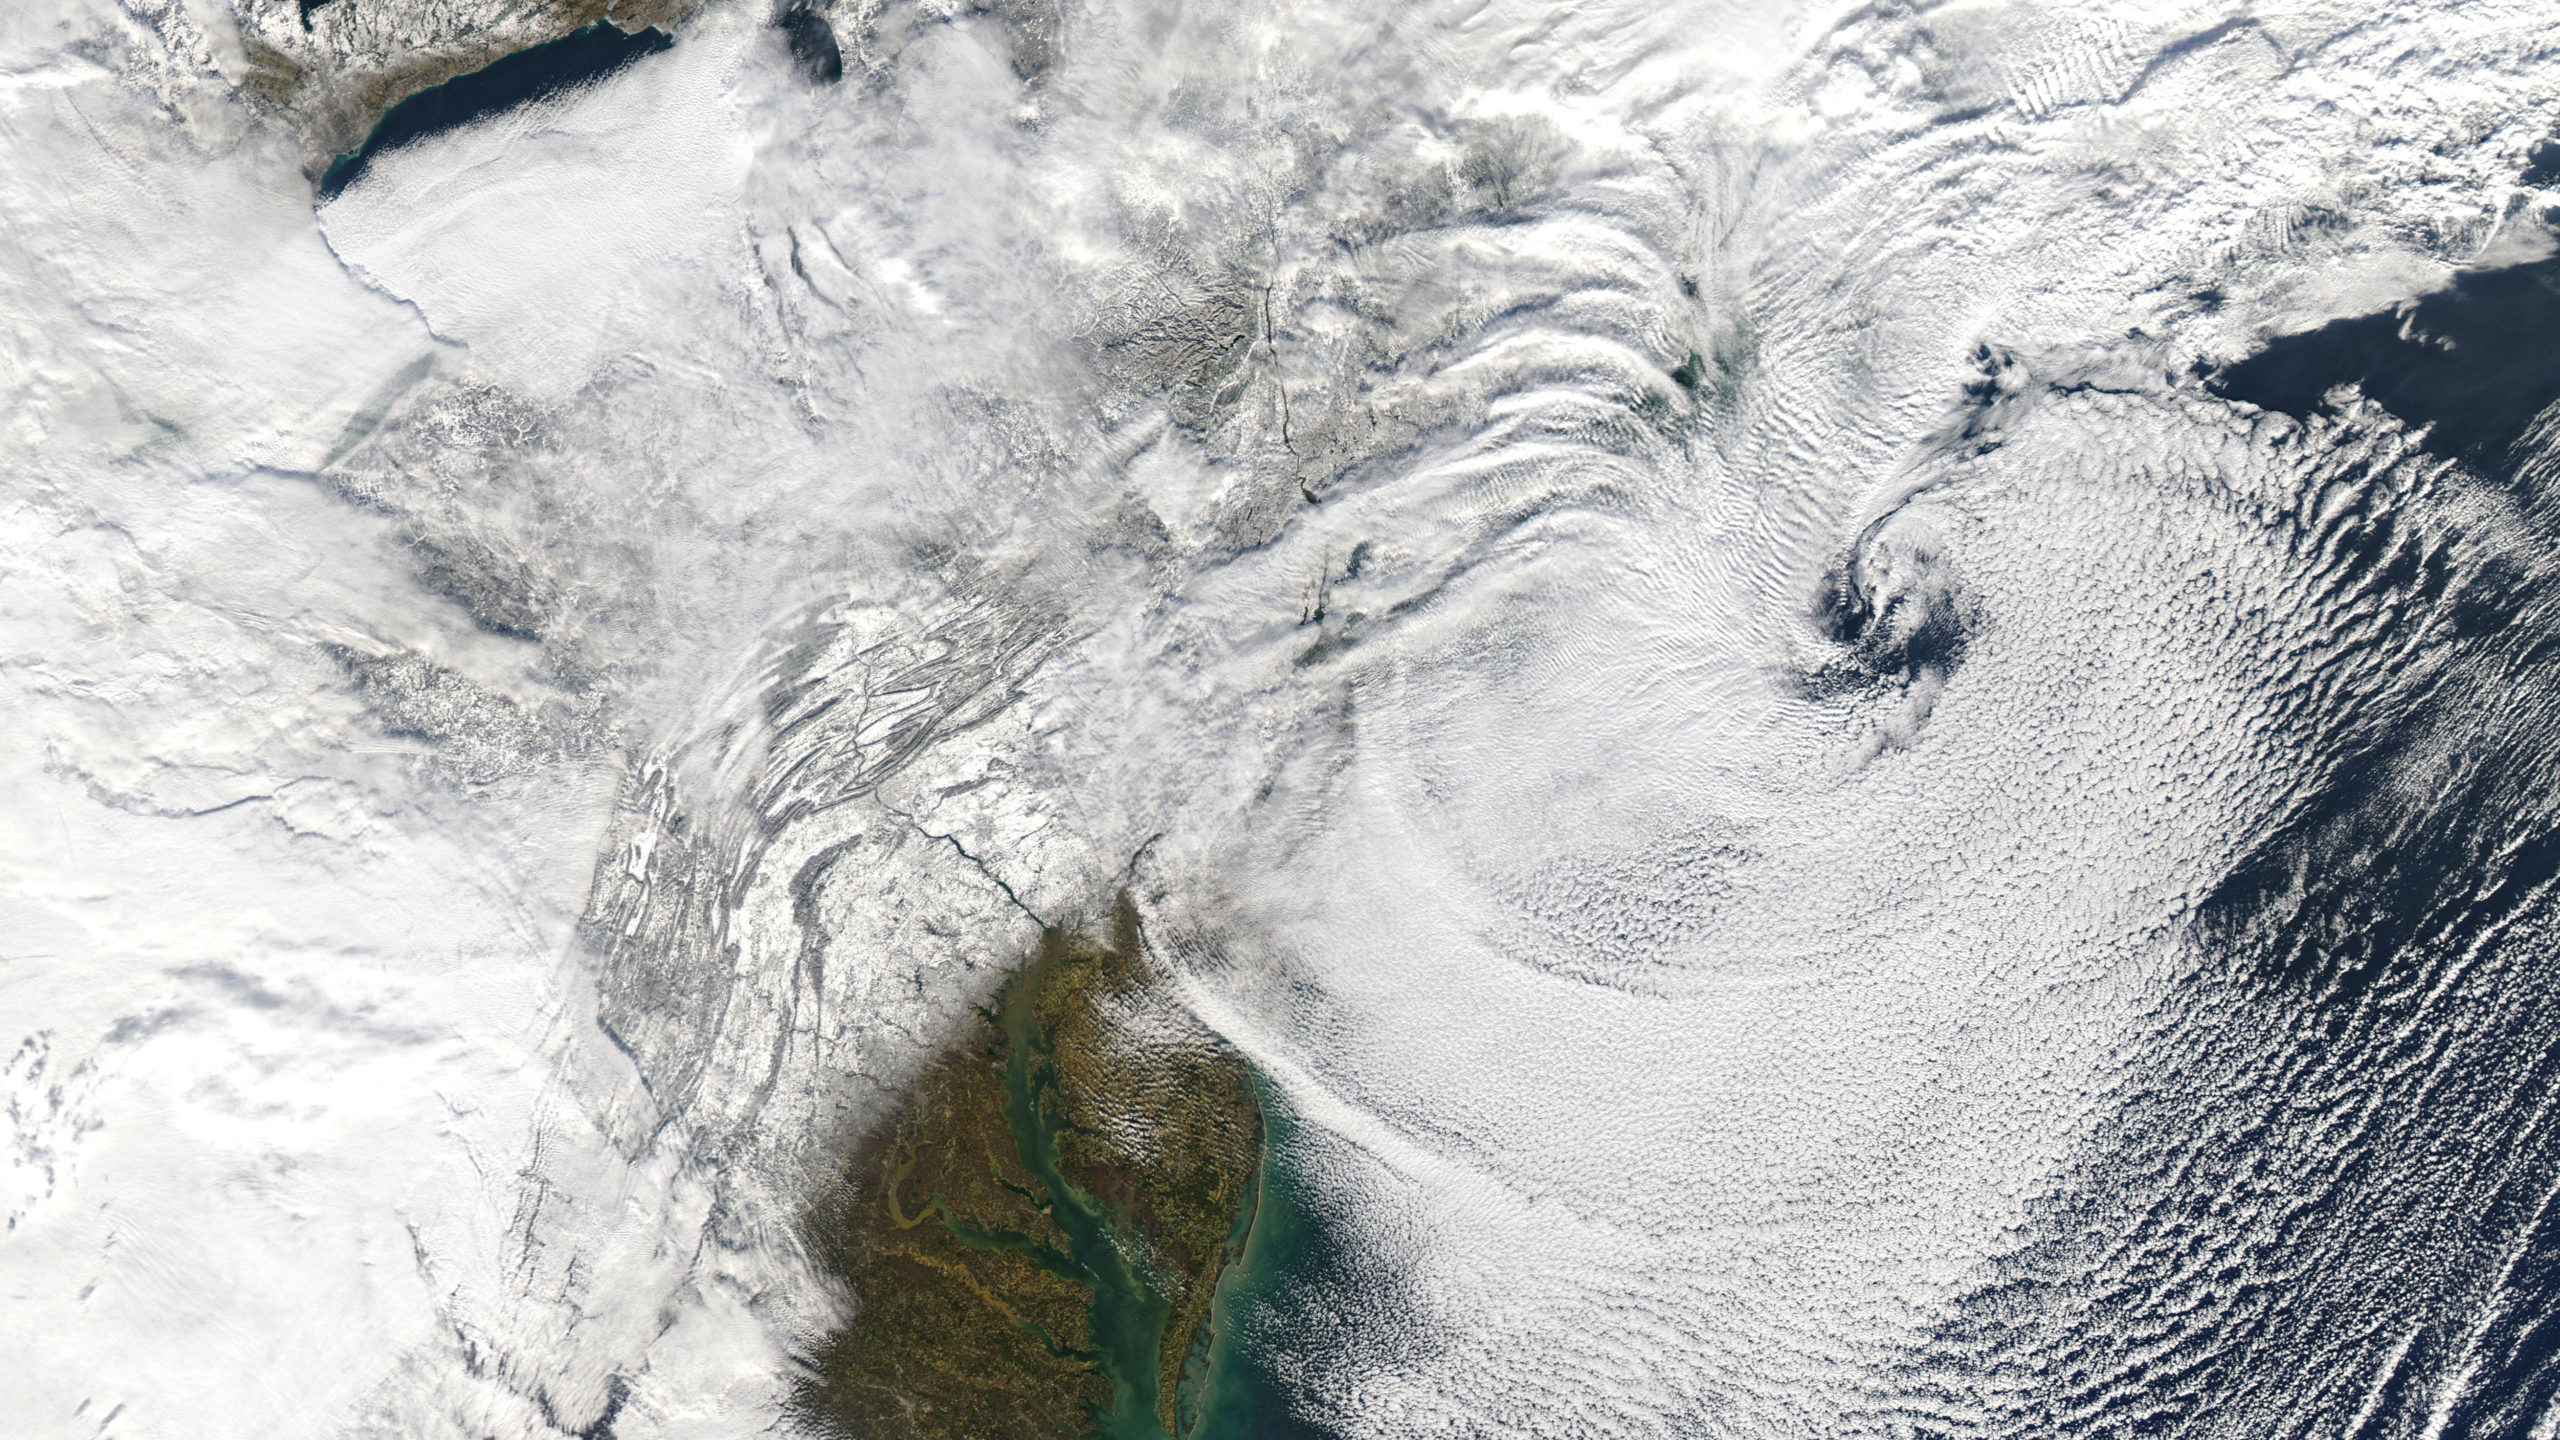 The swirling tail of the nor'easter moves further offshore, revealing the snow-blanketed Northeast on Dec. 17. (Image: NASA)